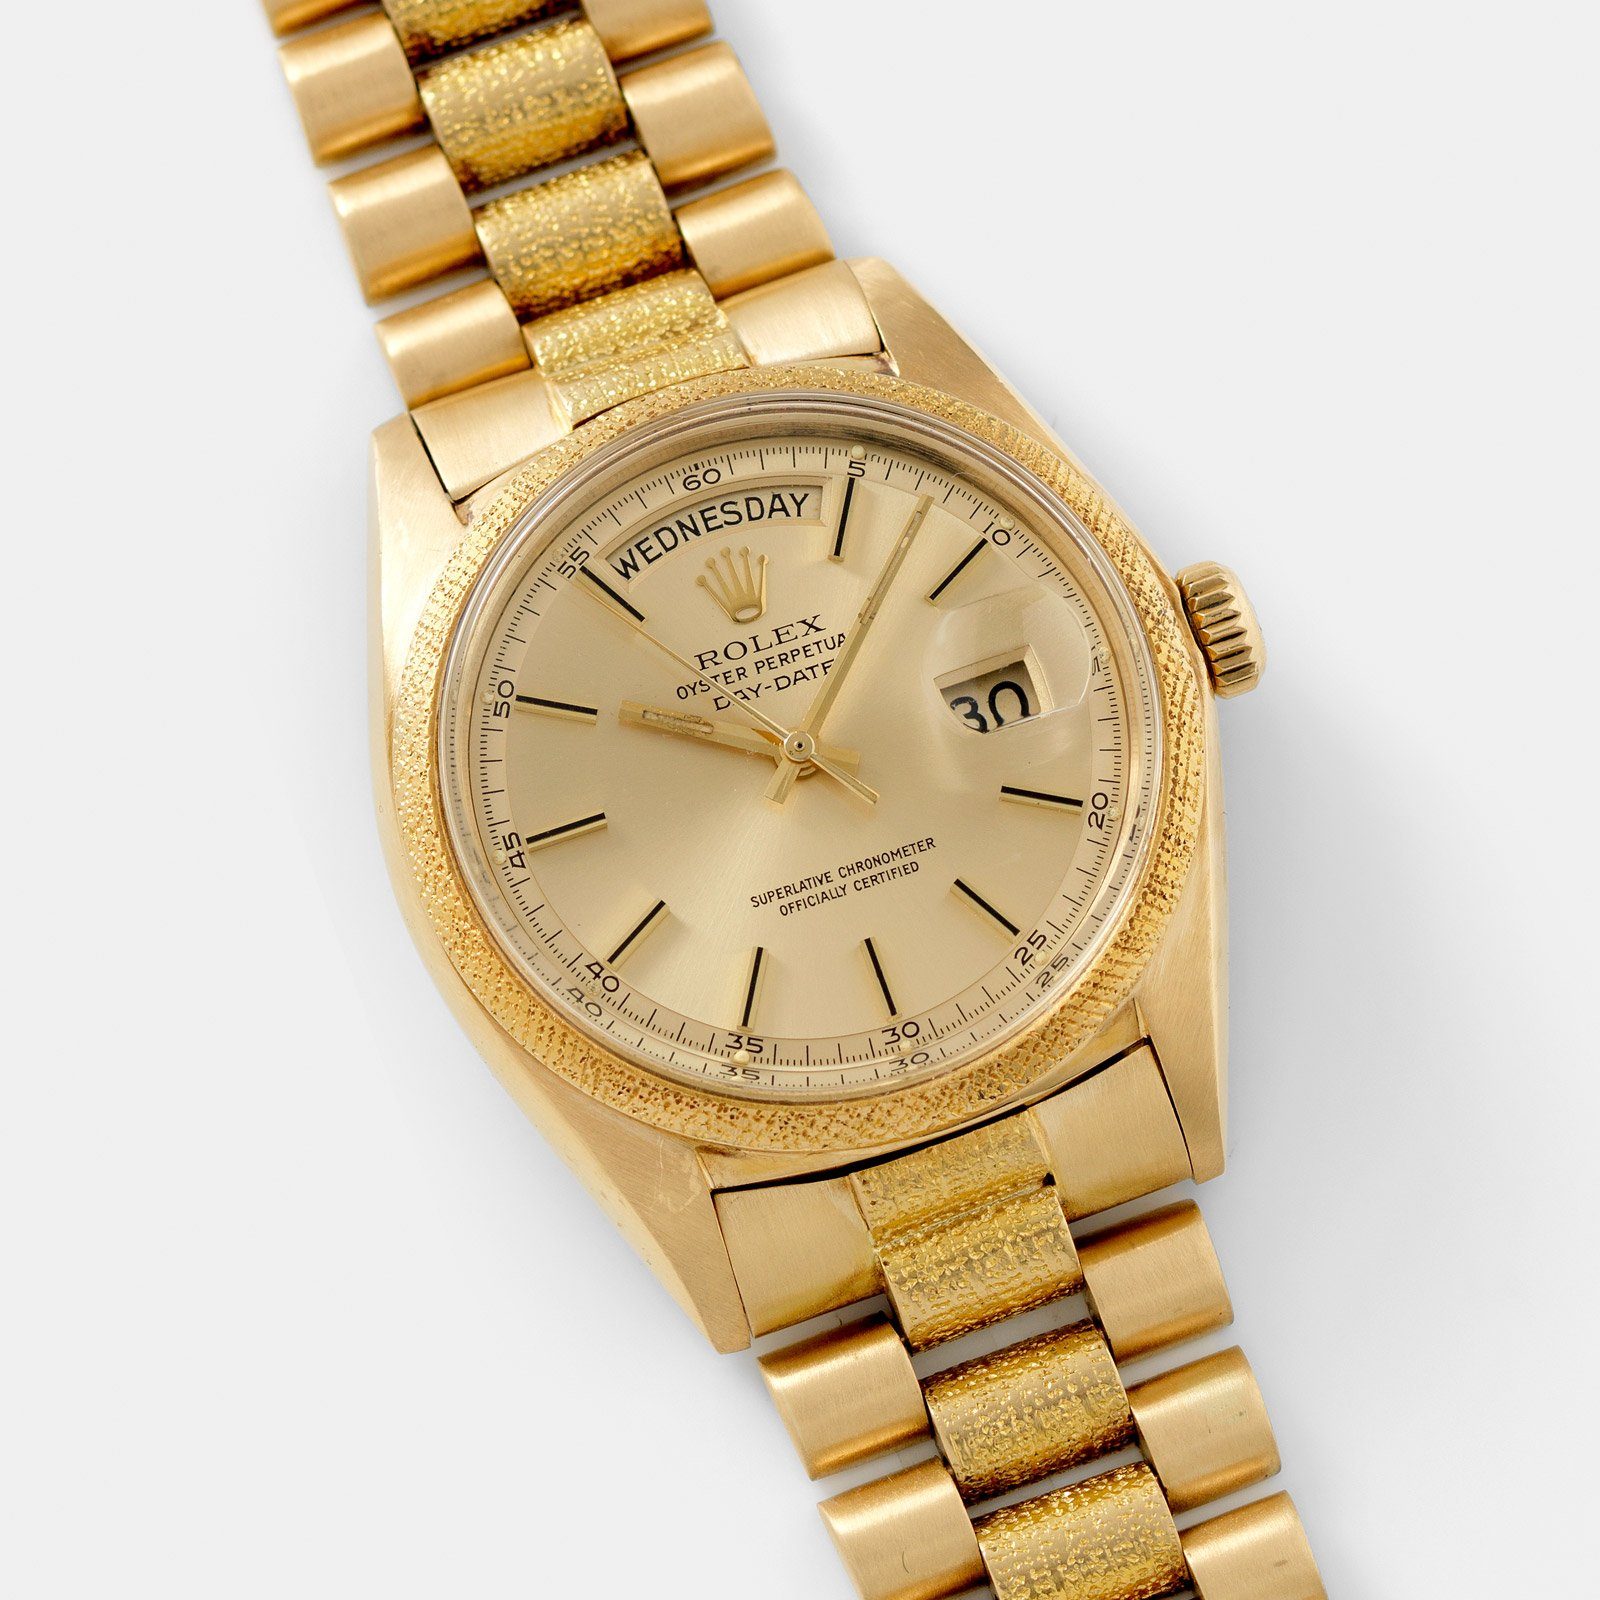 Rolex Day Date Yellow Gold Morellis Finish 1811